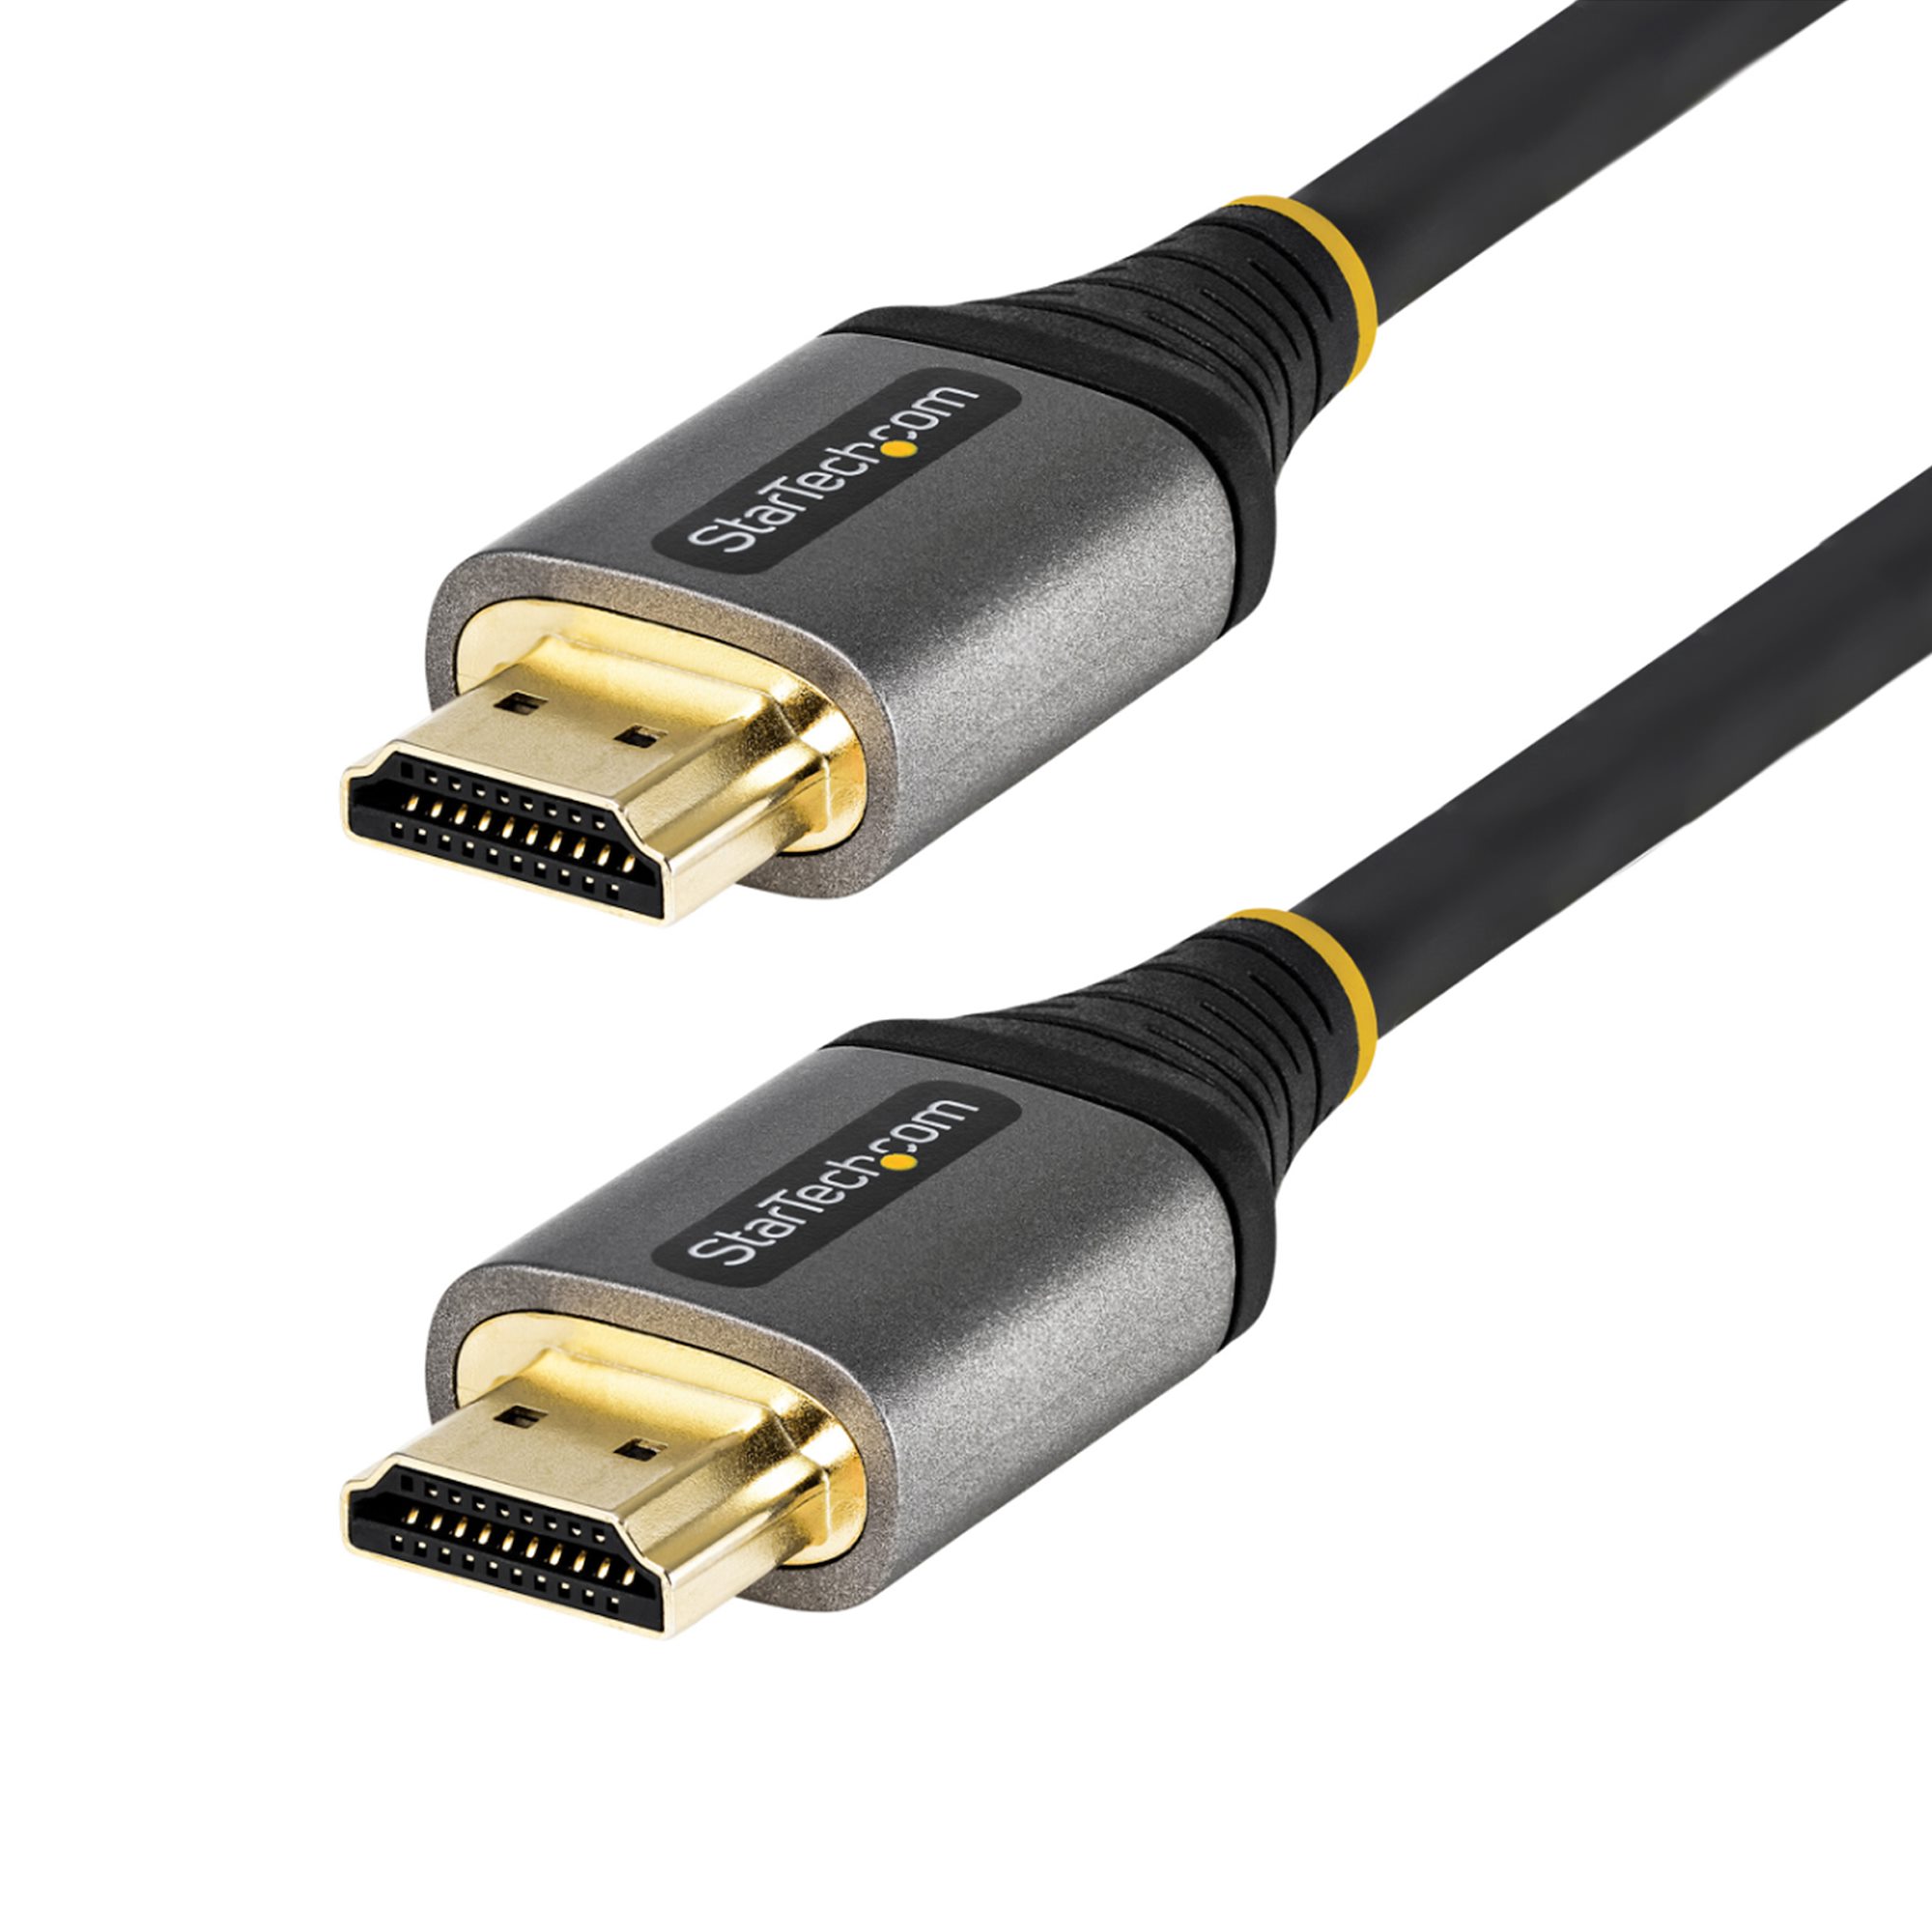  StarTech.com 5m High Speed HDMI Cable – Ultra HD 4k x 2k HDMI  Cable – HDMI to HDMI M/M - 5 meter HDMI 1.4 Cable - Audio/Video Gold-Plated  (HDMM5M),Black : Electronics